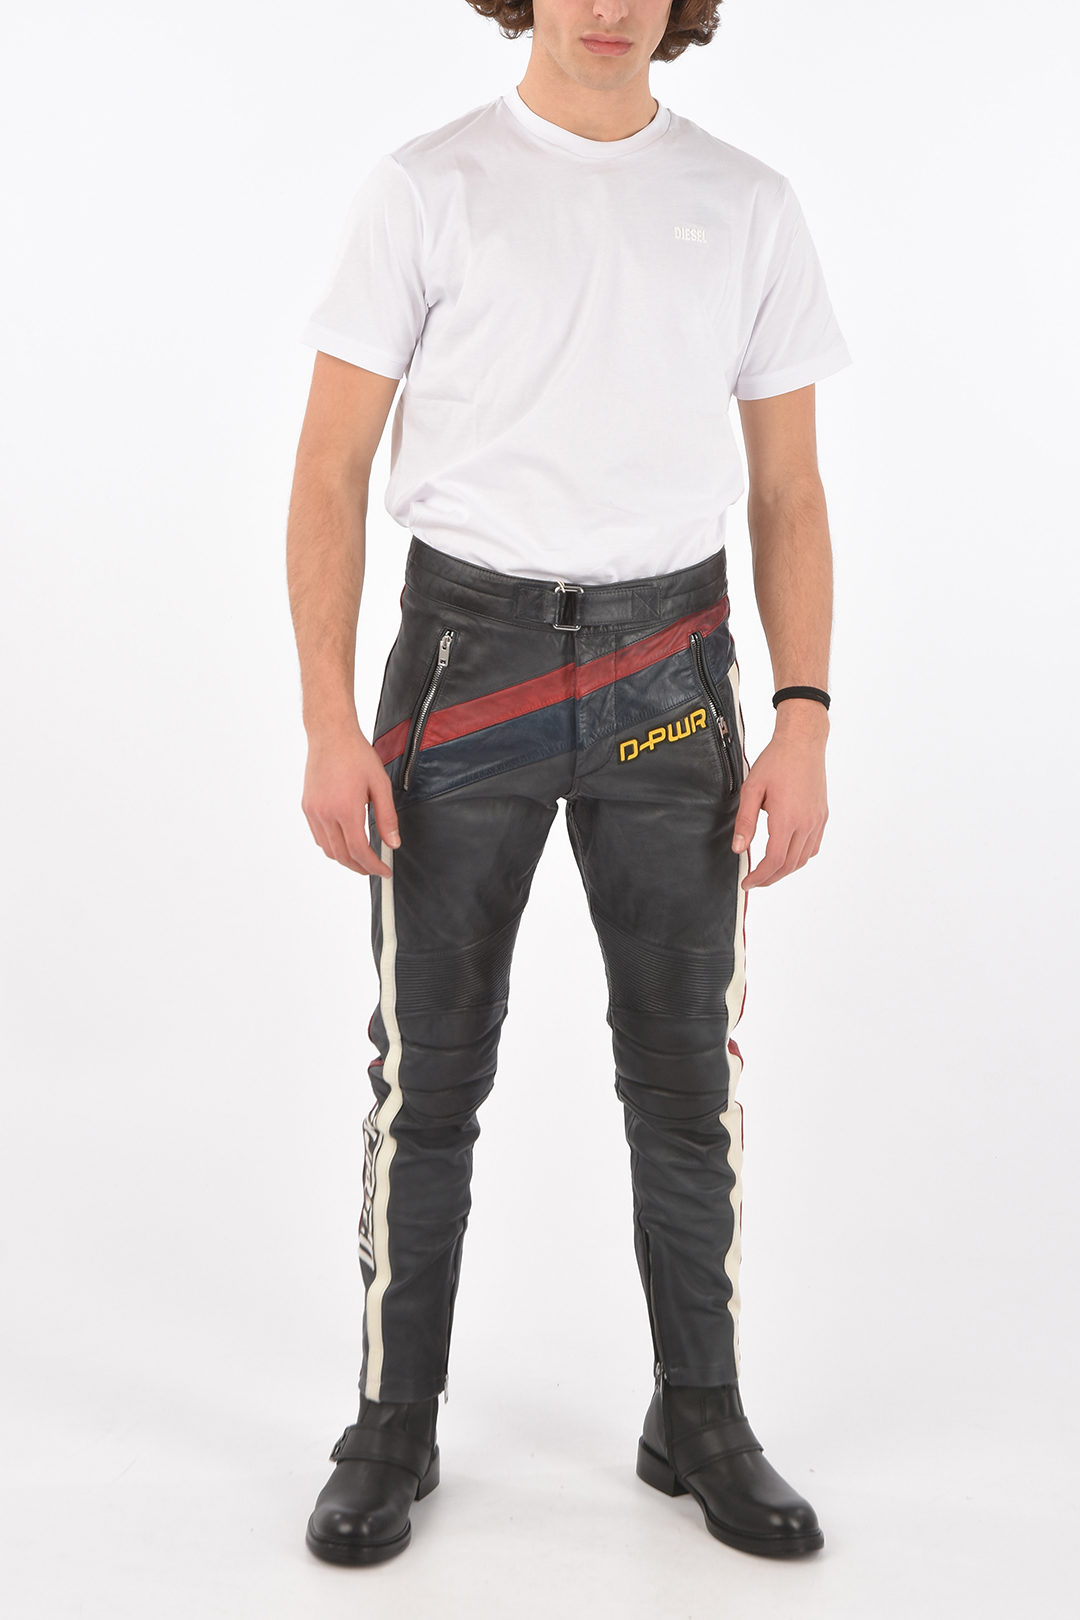 Diesel leather P-POWER biker pants with ankle zip men - Glamood Outlet